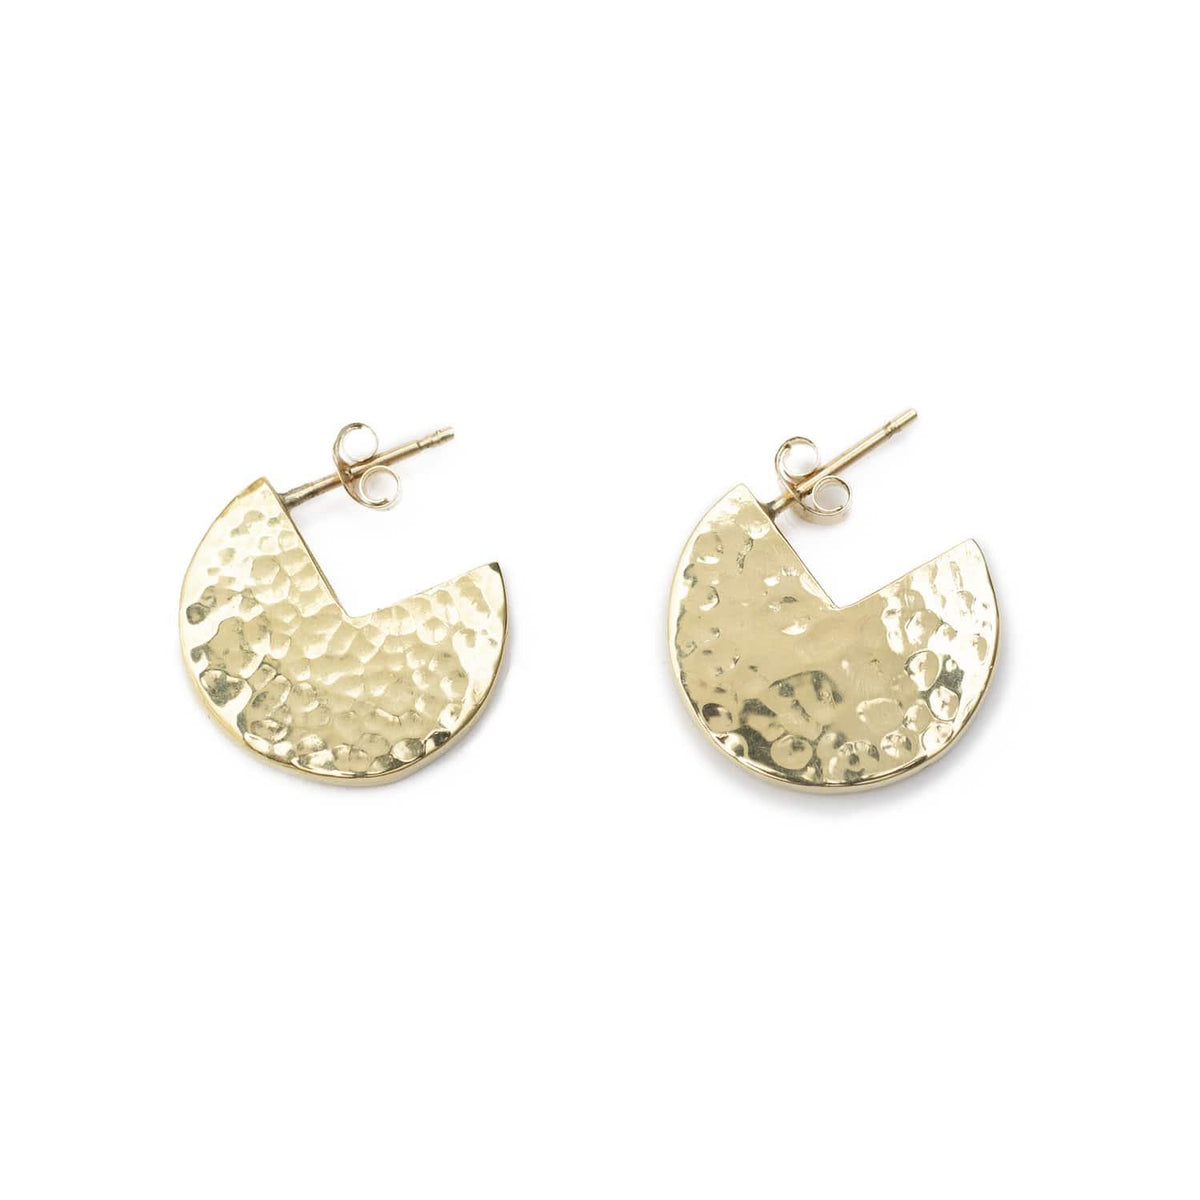 Hammered textured discs stud earrings plated with gold crafted in brass for everyday wear